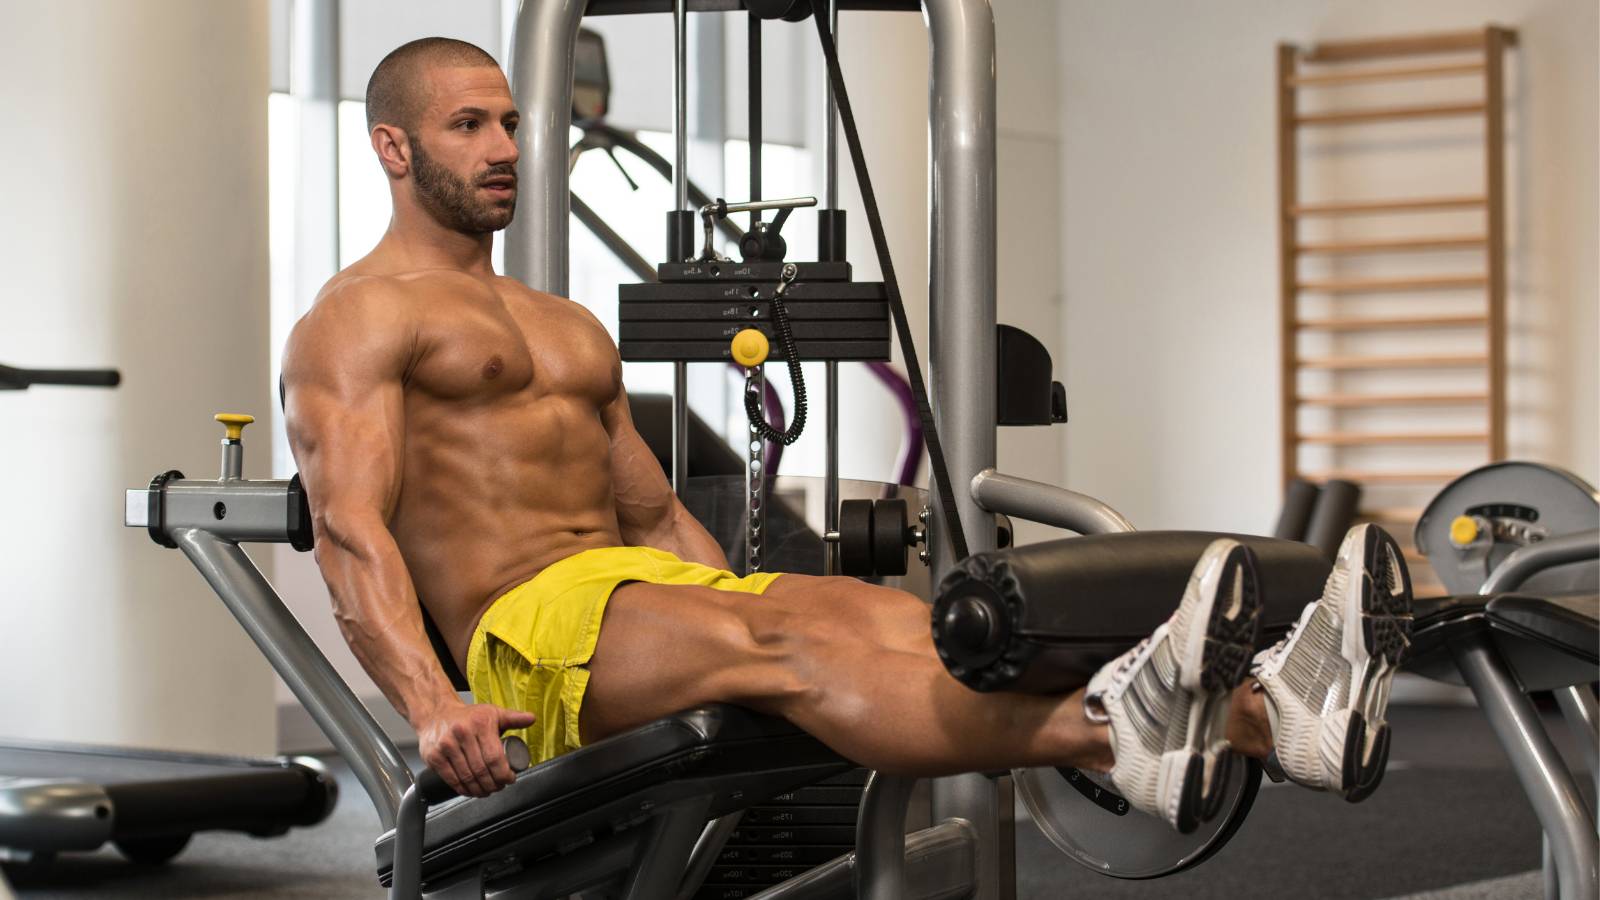 Leg Extensions: Dangerous for your knees or great rehab exercise?